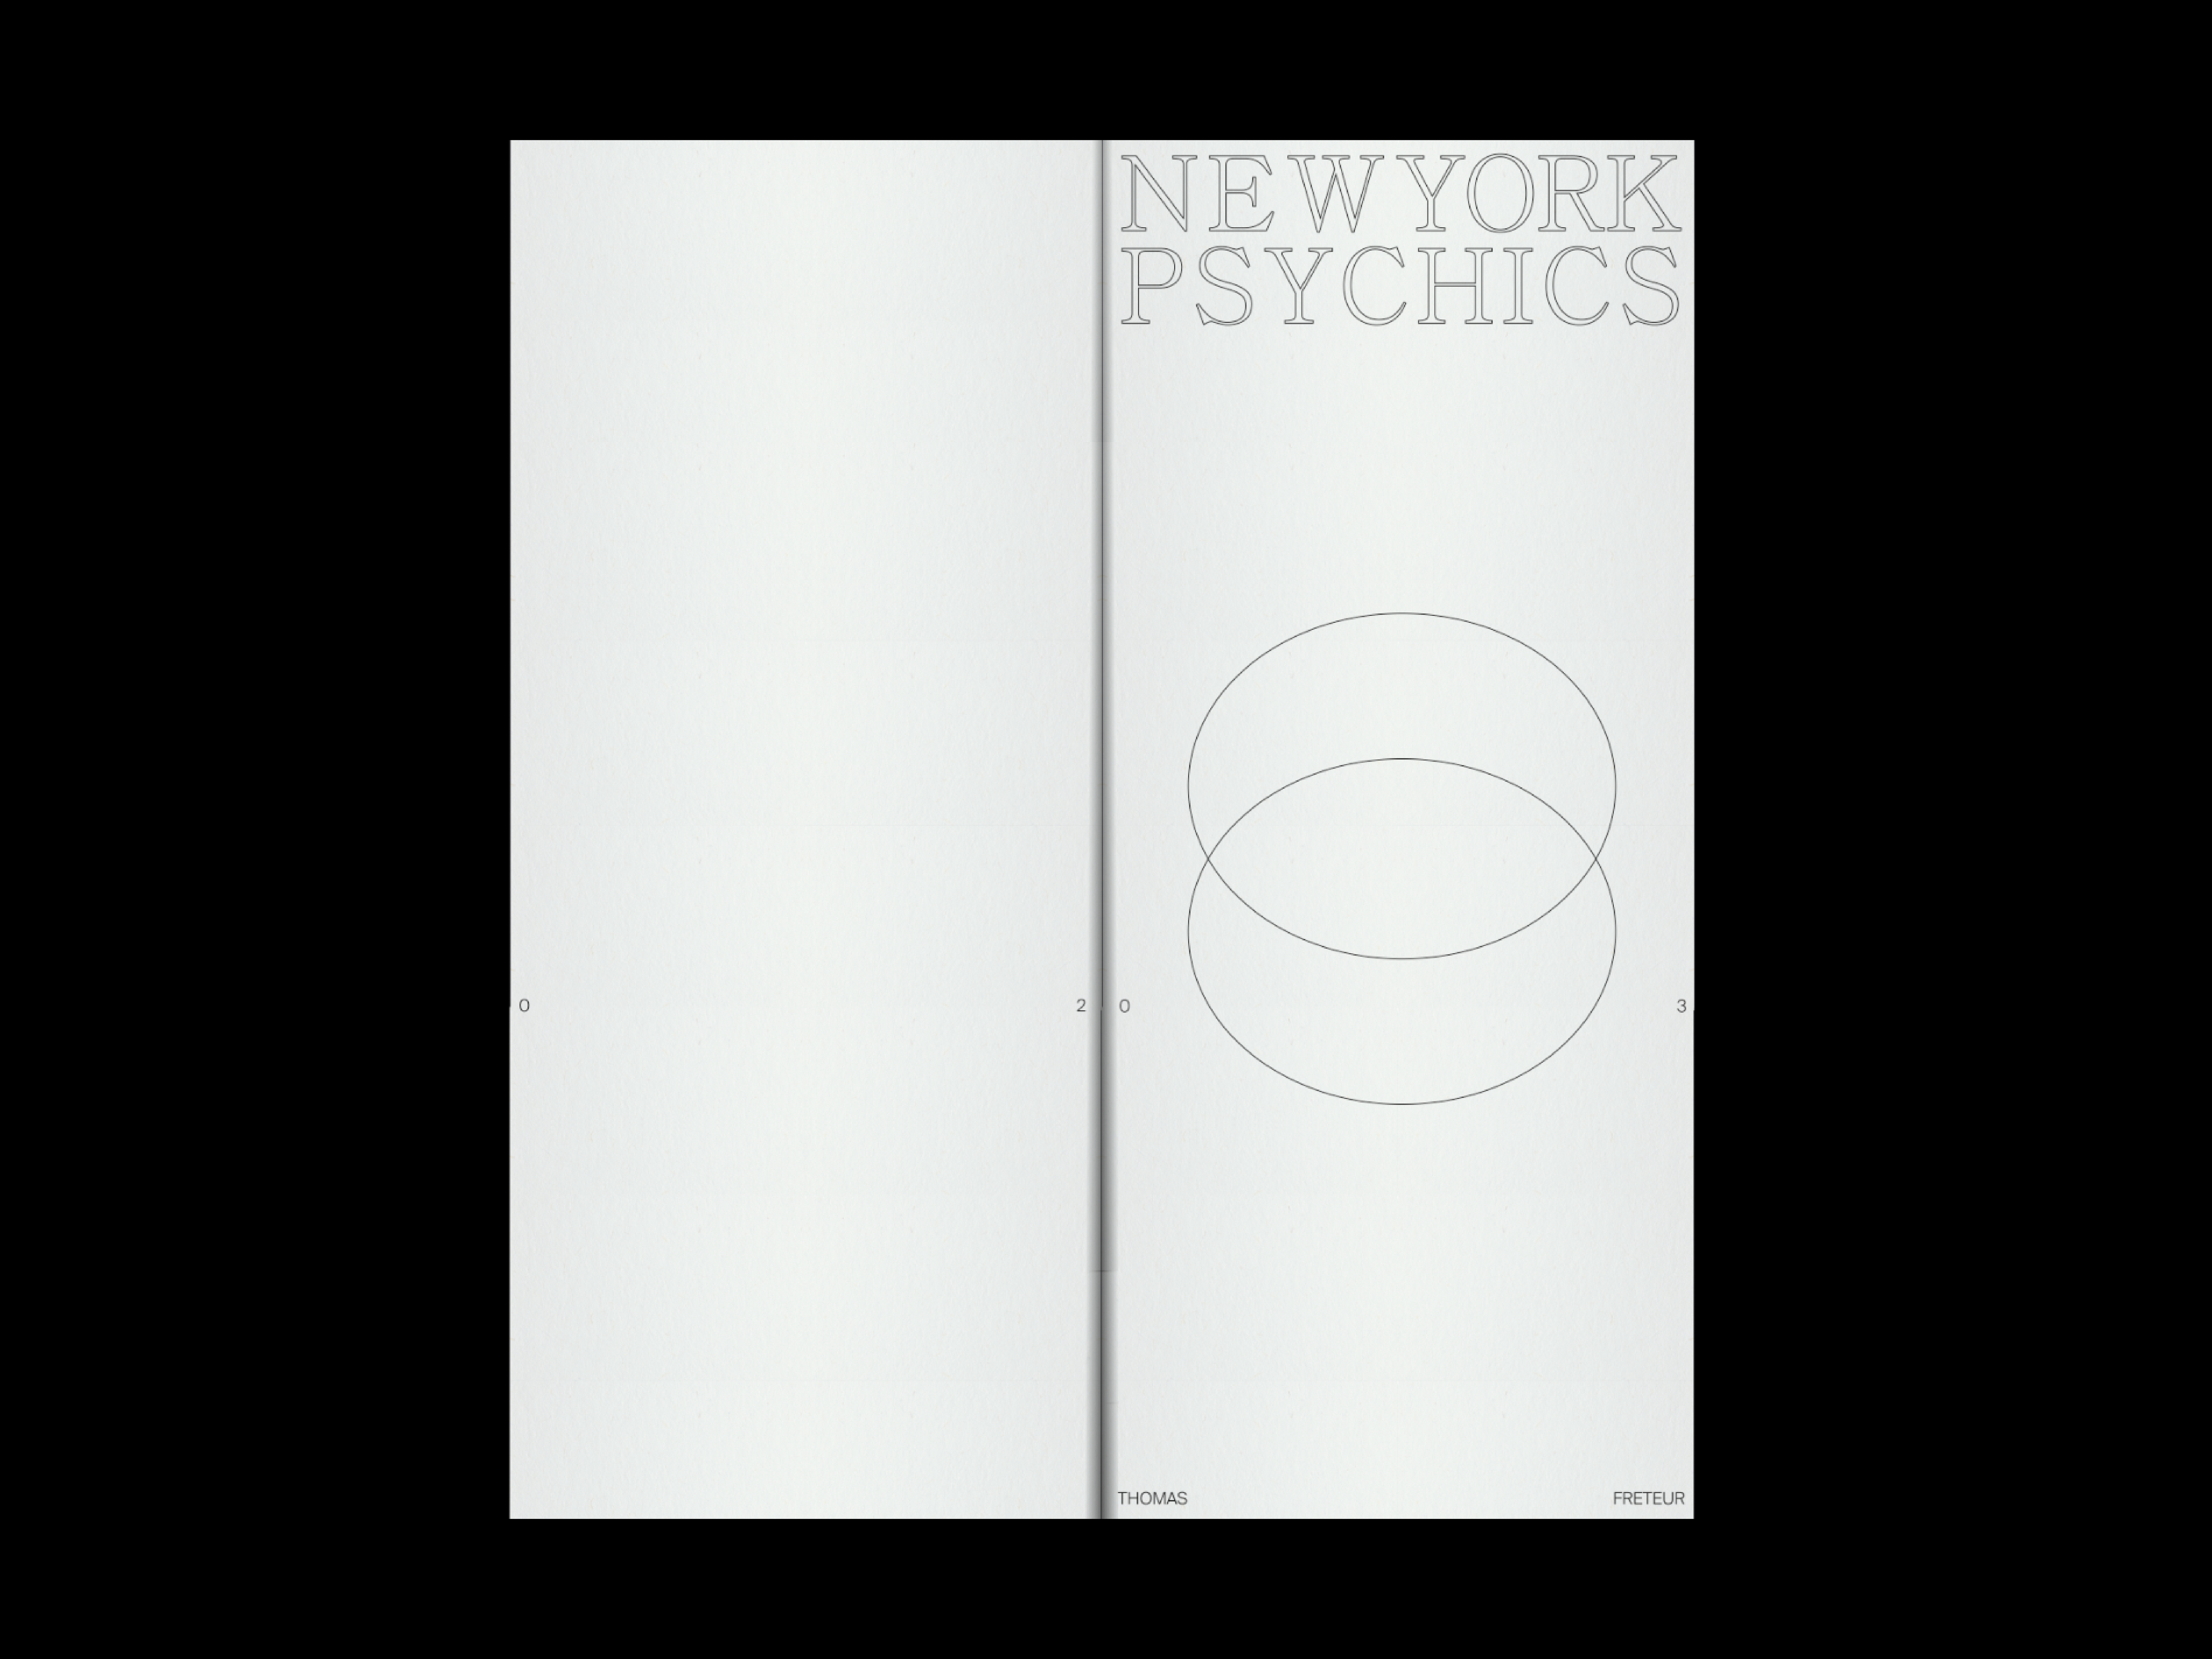 https://julienbaiamonte.com/content/1-projects/new-york-psychics/nyc_psychics_scan006_baiamonte_251019.png.png